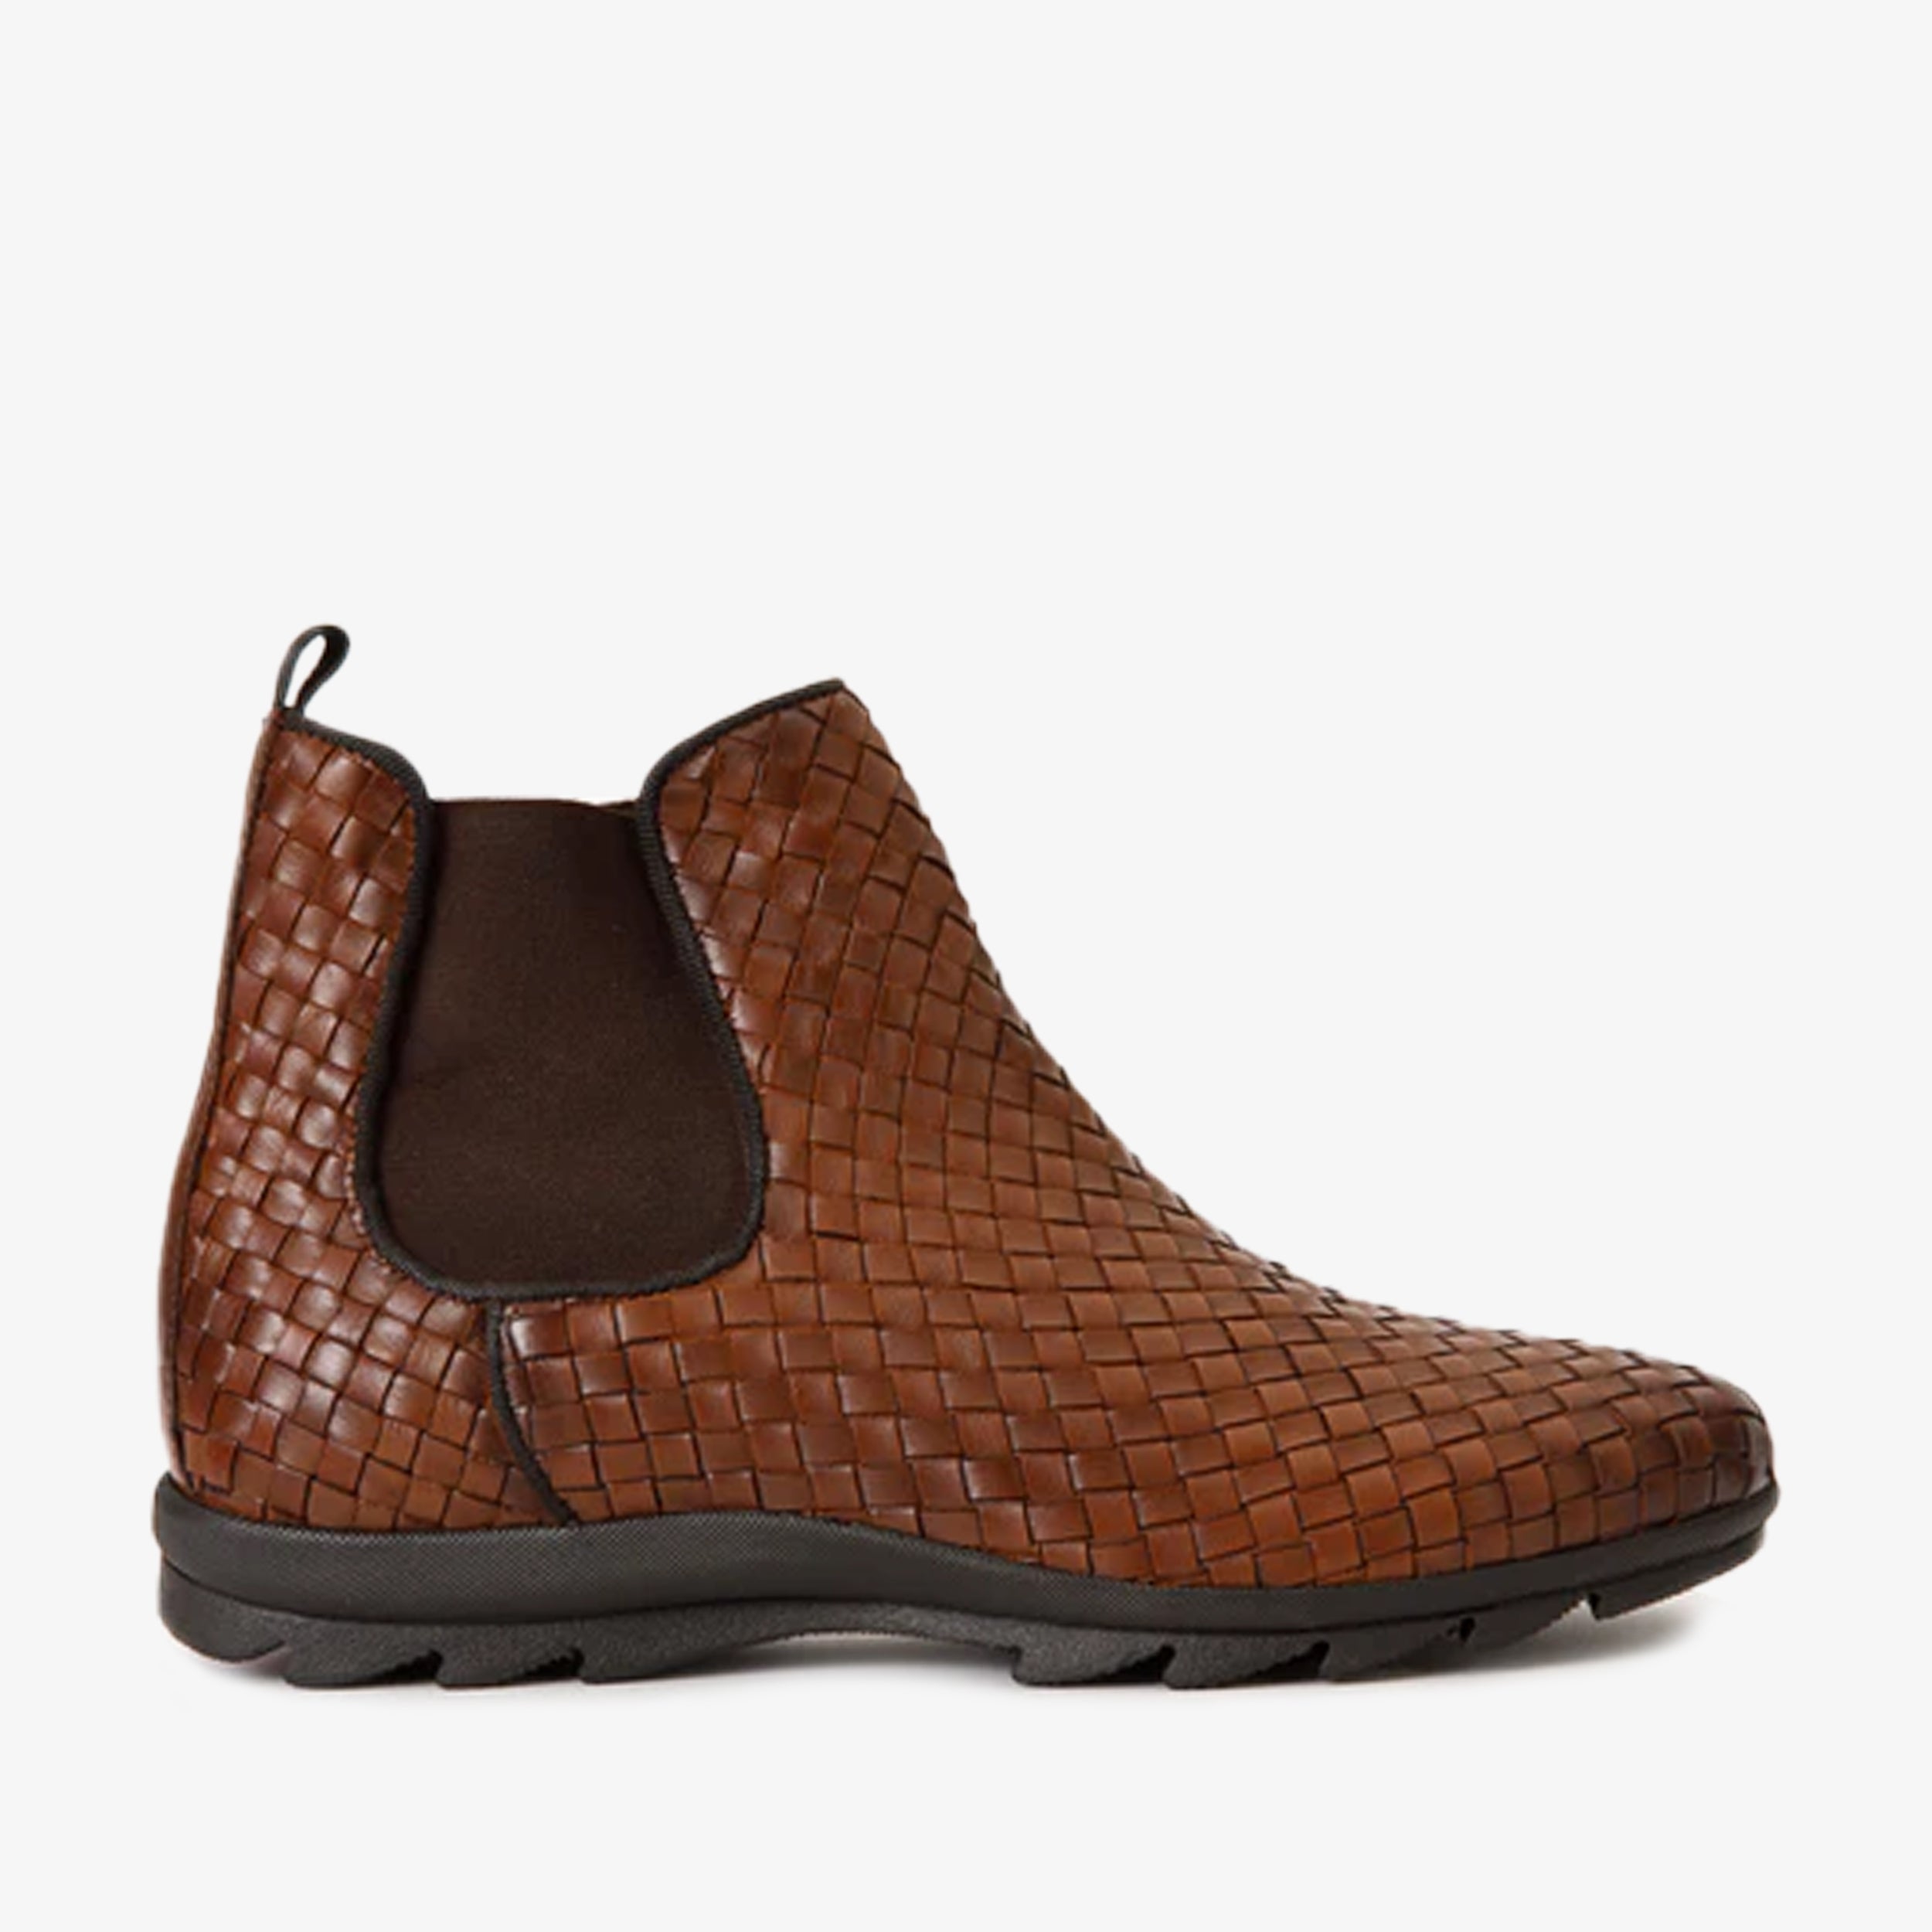 The Luxpre Tan Leather Handwoven Casual Chelsea Men Boot